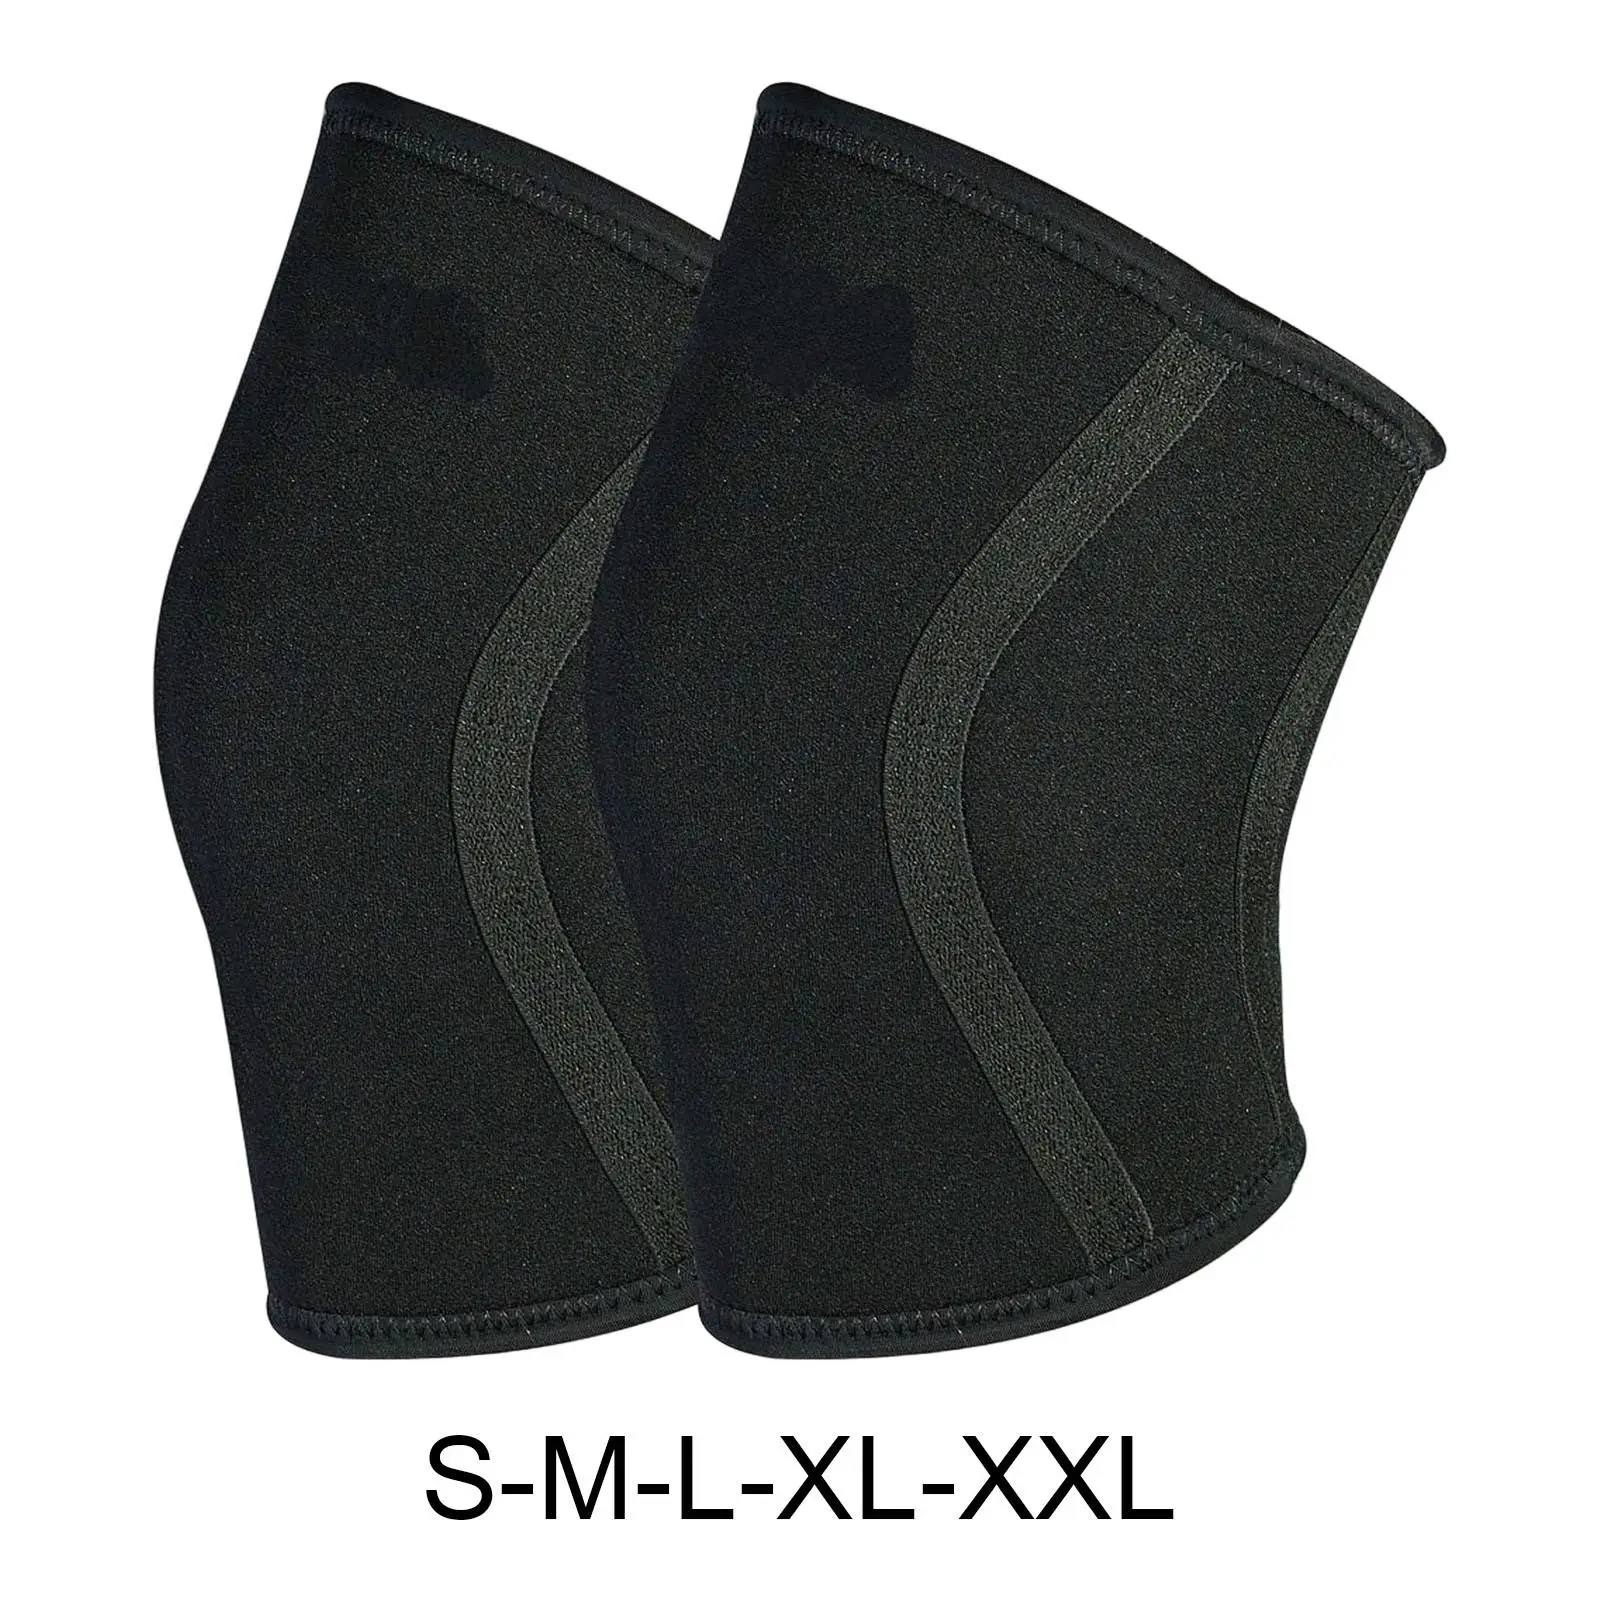 2x Knee Brace Support Patella Pad Women Men Protector Knee Sleeves for Cycling Fitness Outdoor Workout Jogging